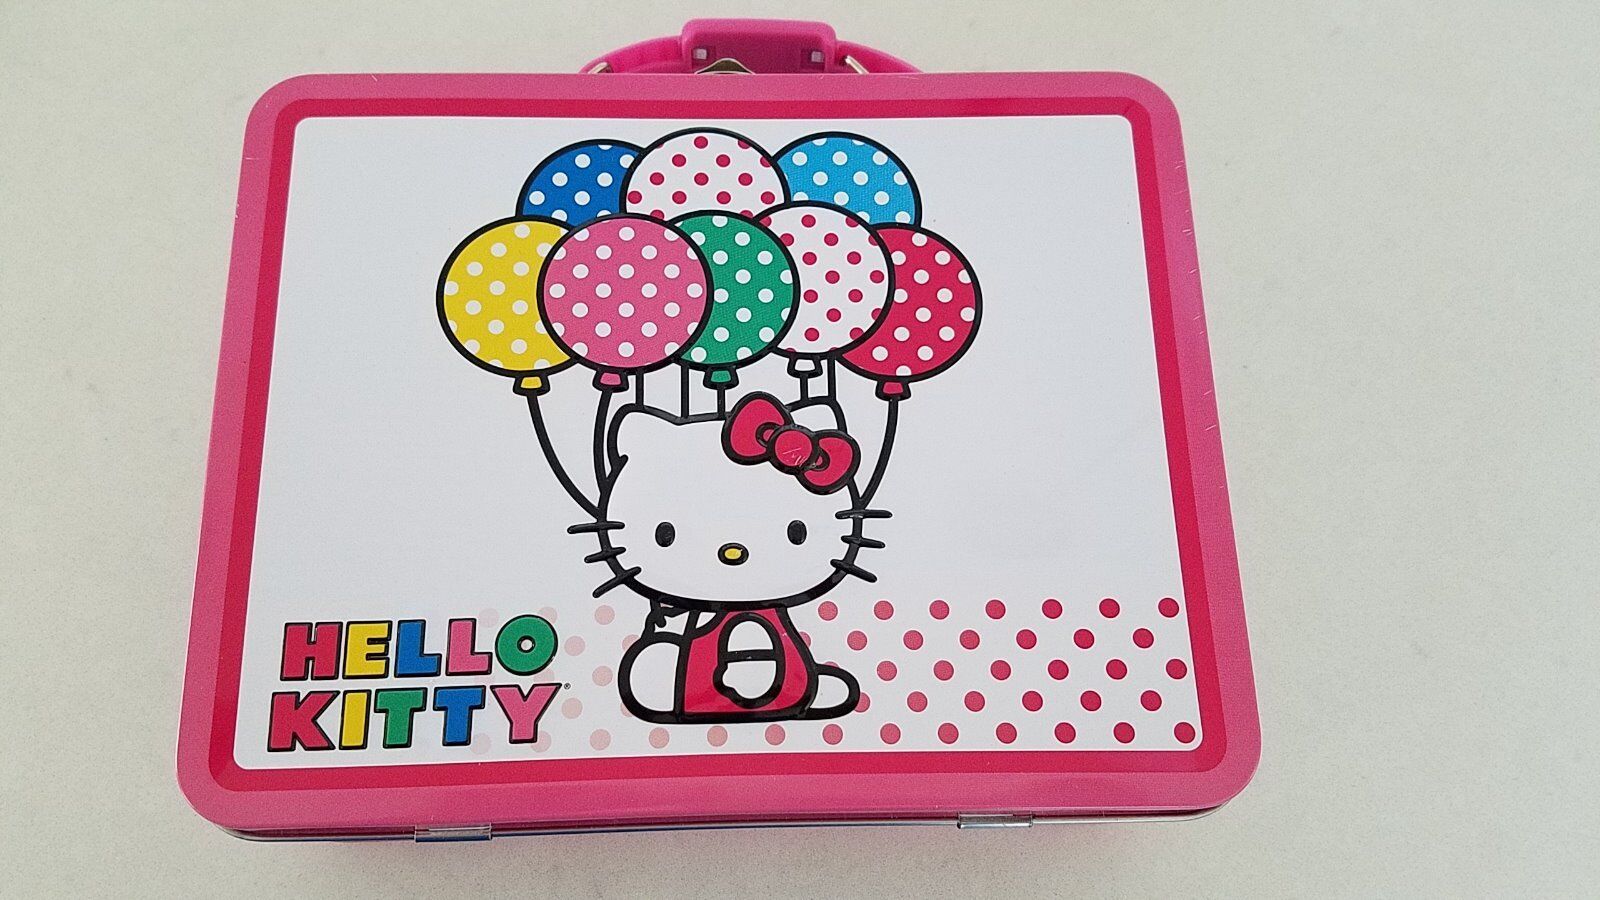 Hello Kitty by Sanrio Metal Lunch Box Tin Production Date 08/01/11